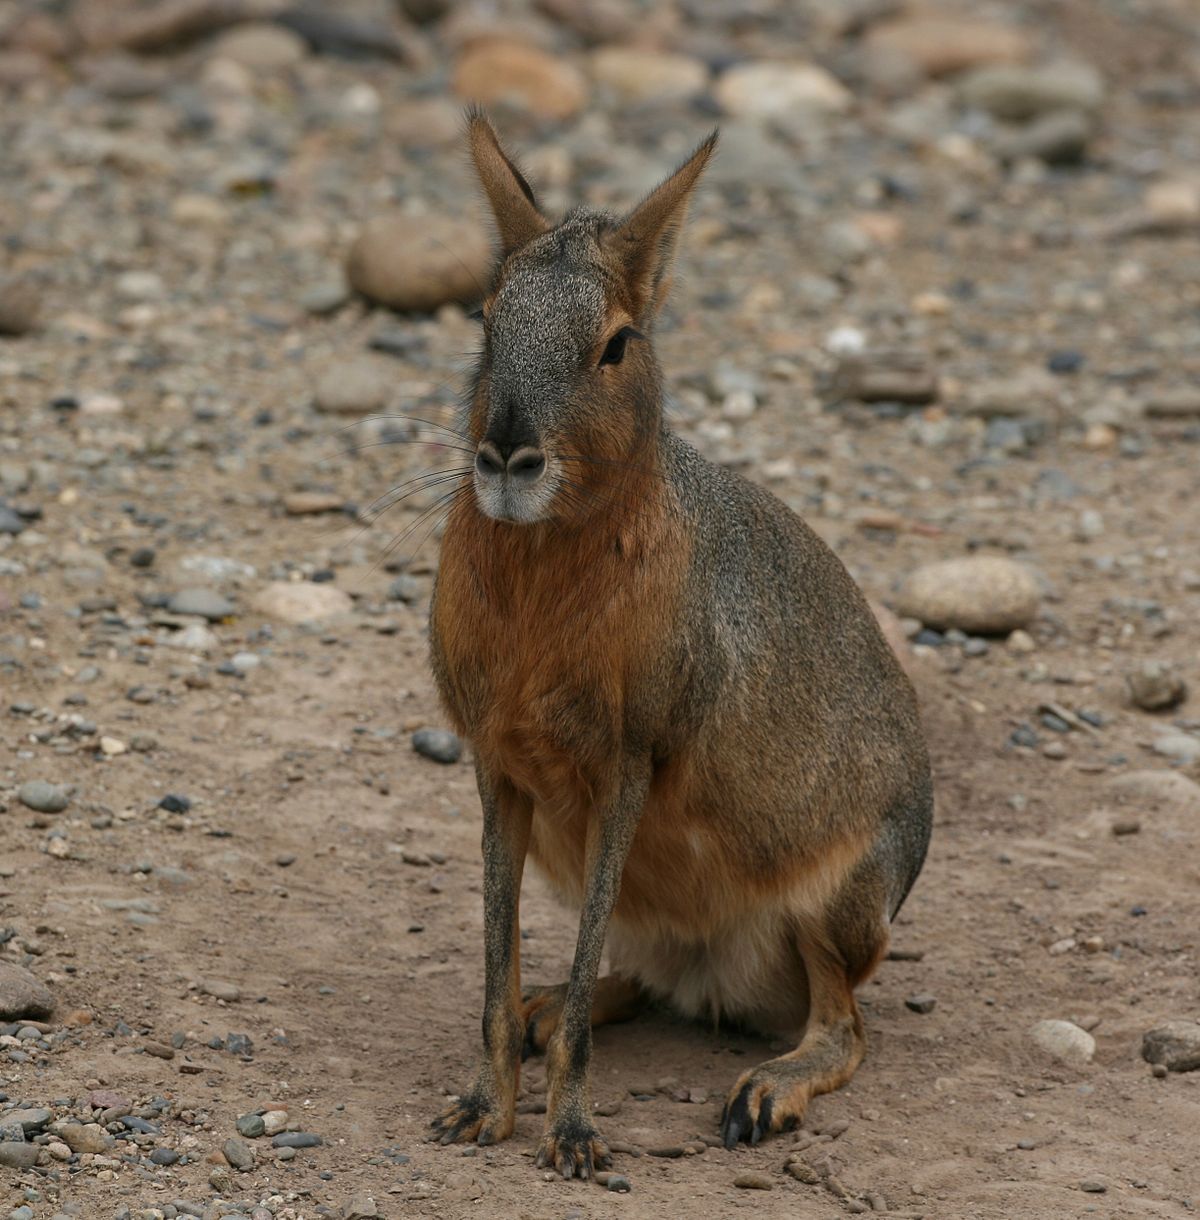 Is a Patagonian cavy a rodent?